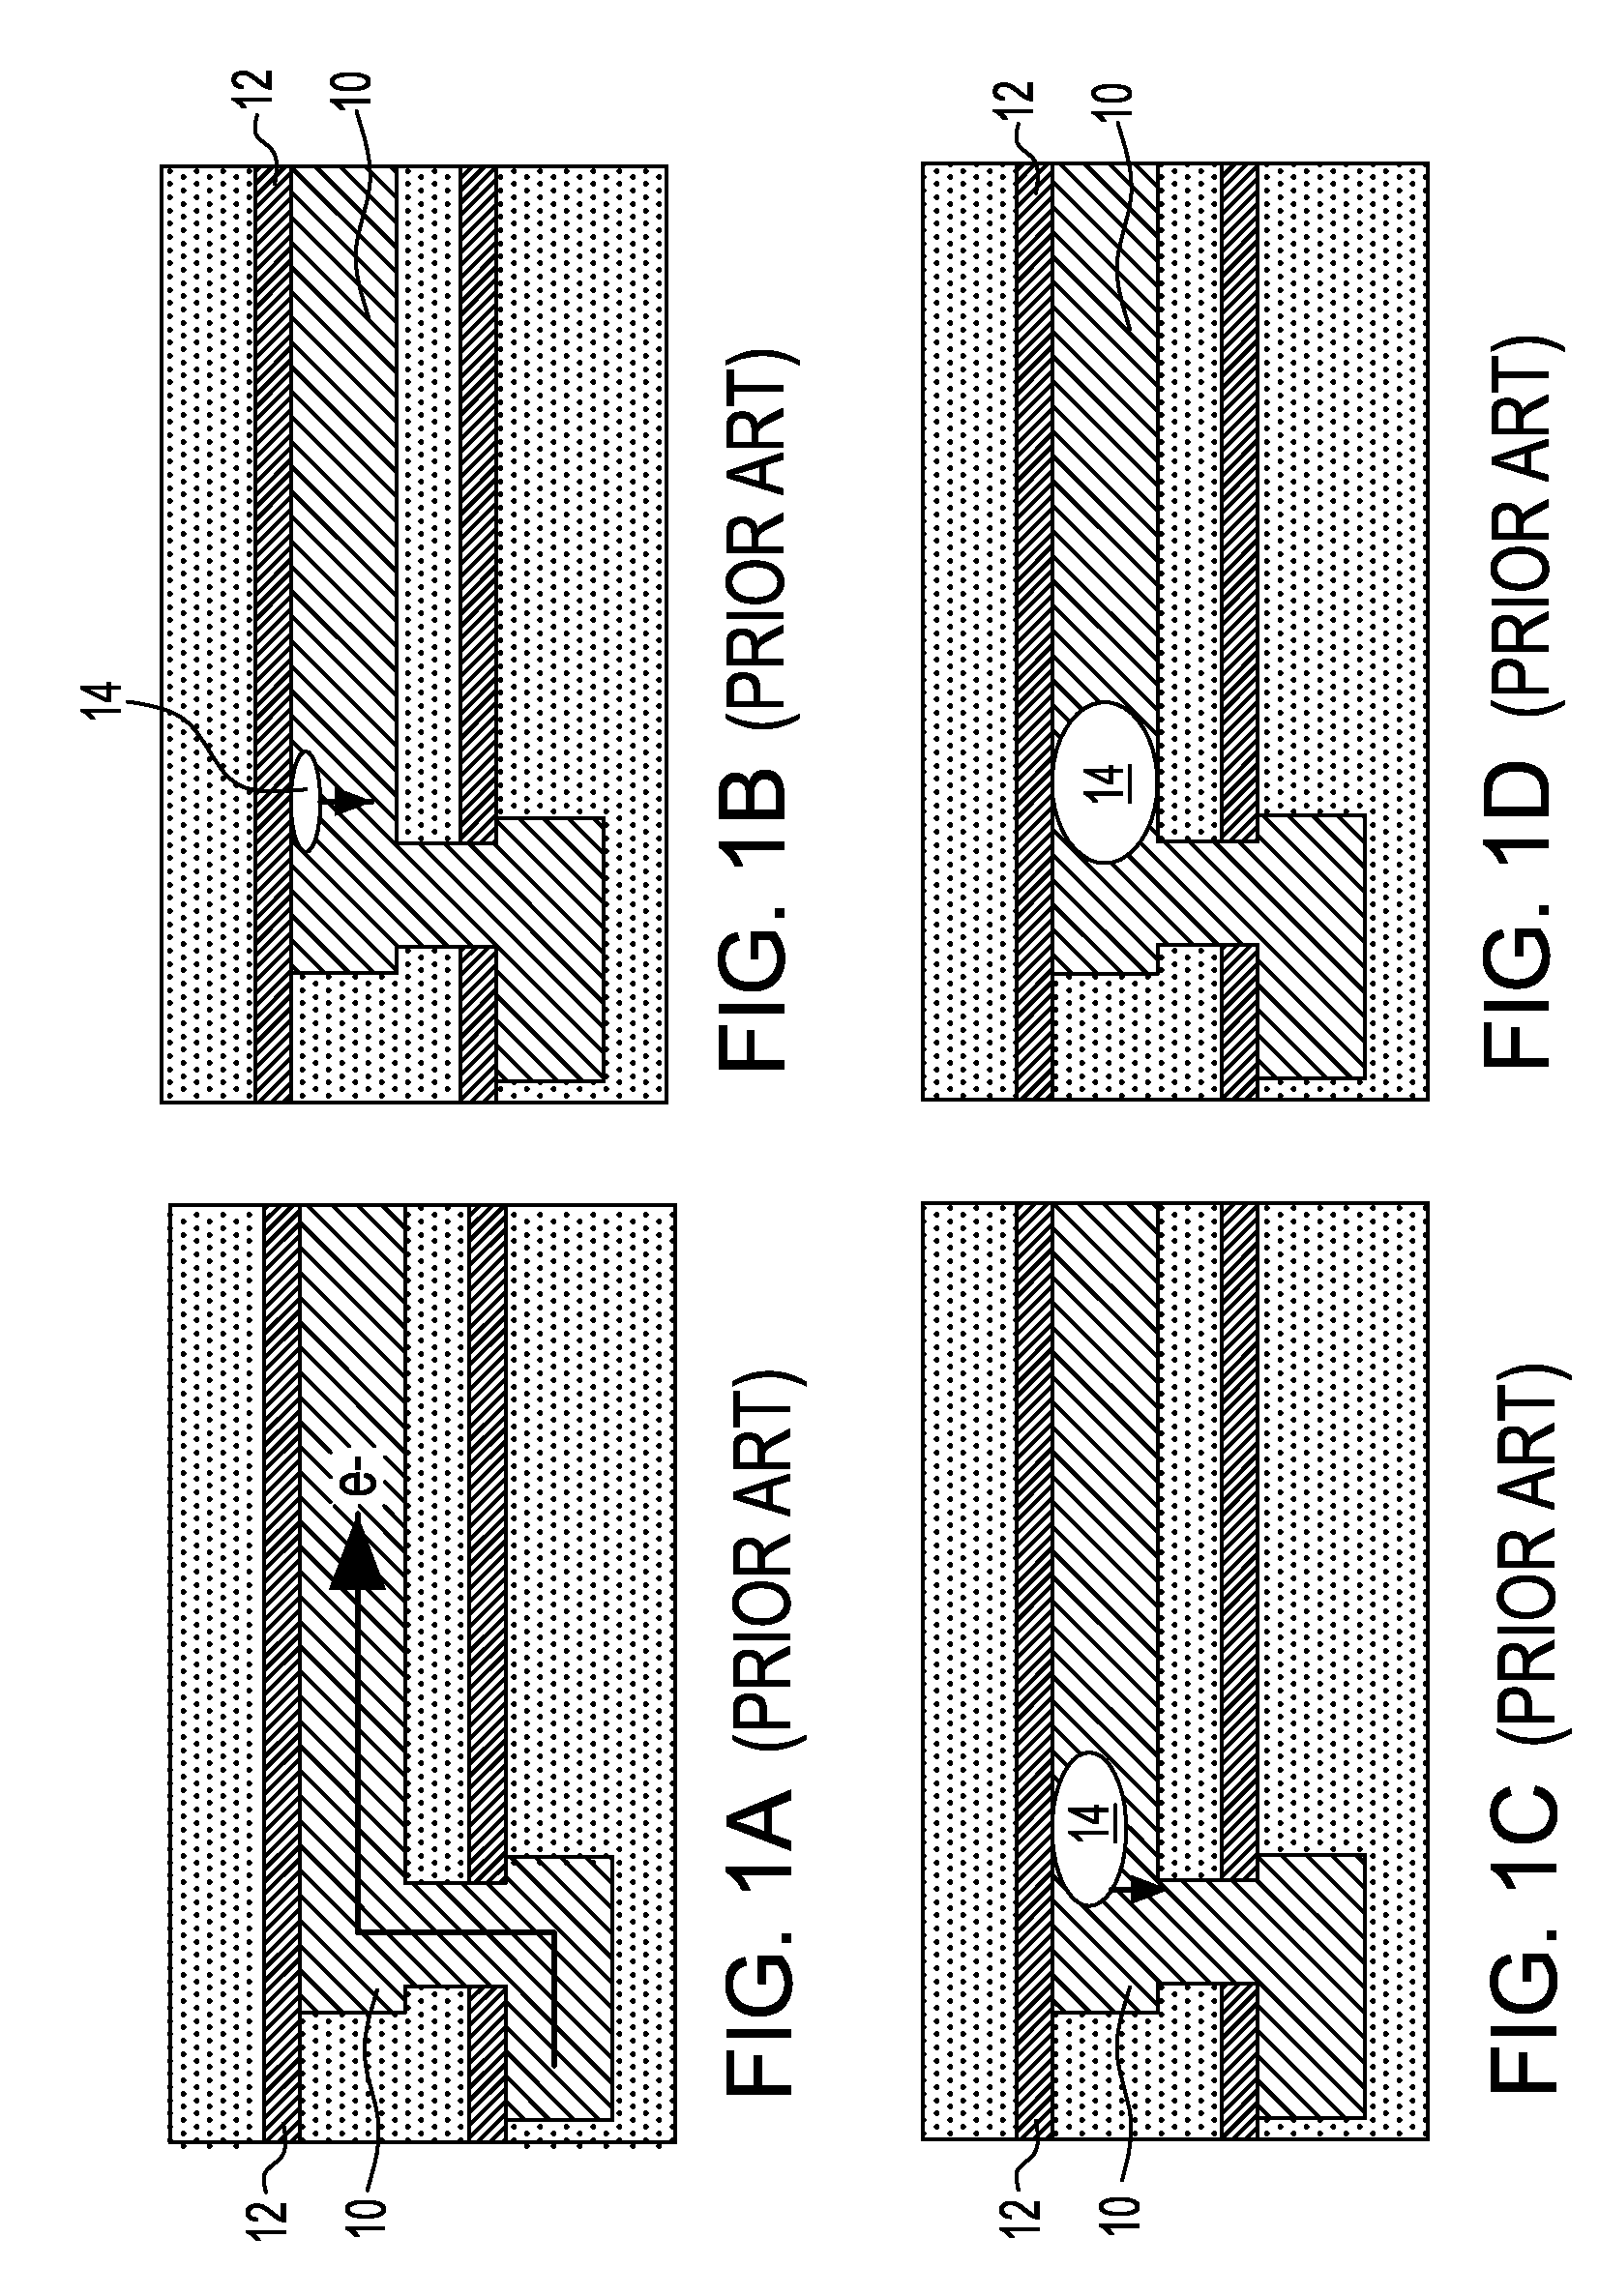 METAL CAP WITH ULTRA-LOW k DIELECTRIC MATERIAL FOR CIRCUIT INTERCONNECT APPLICATIONS